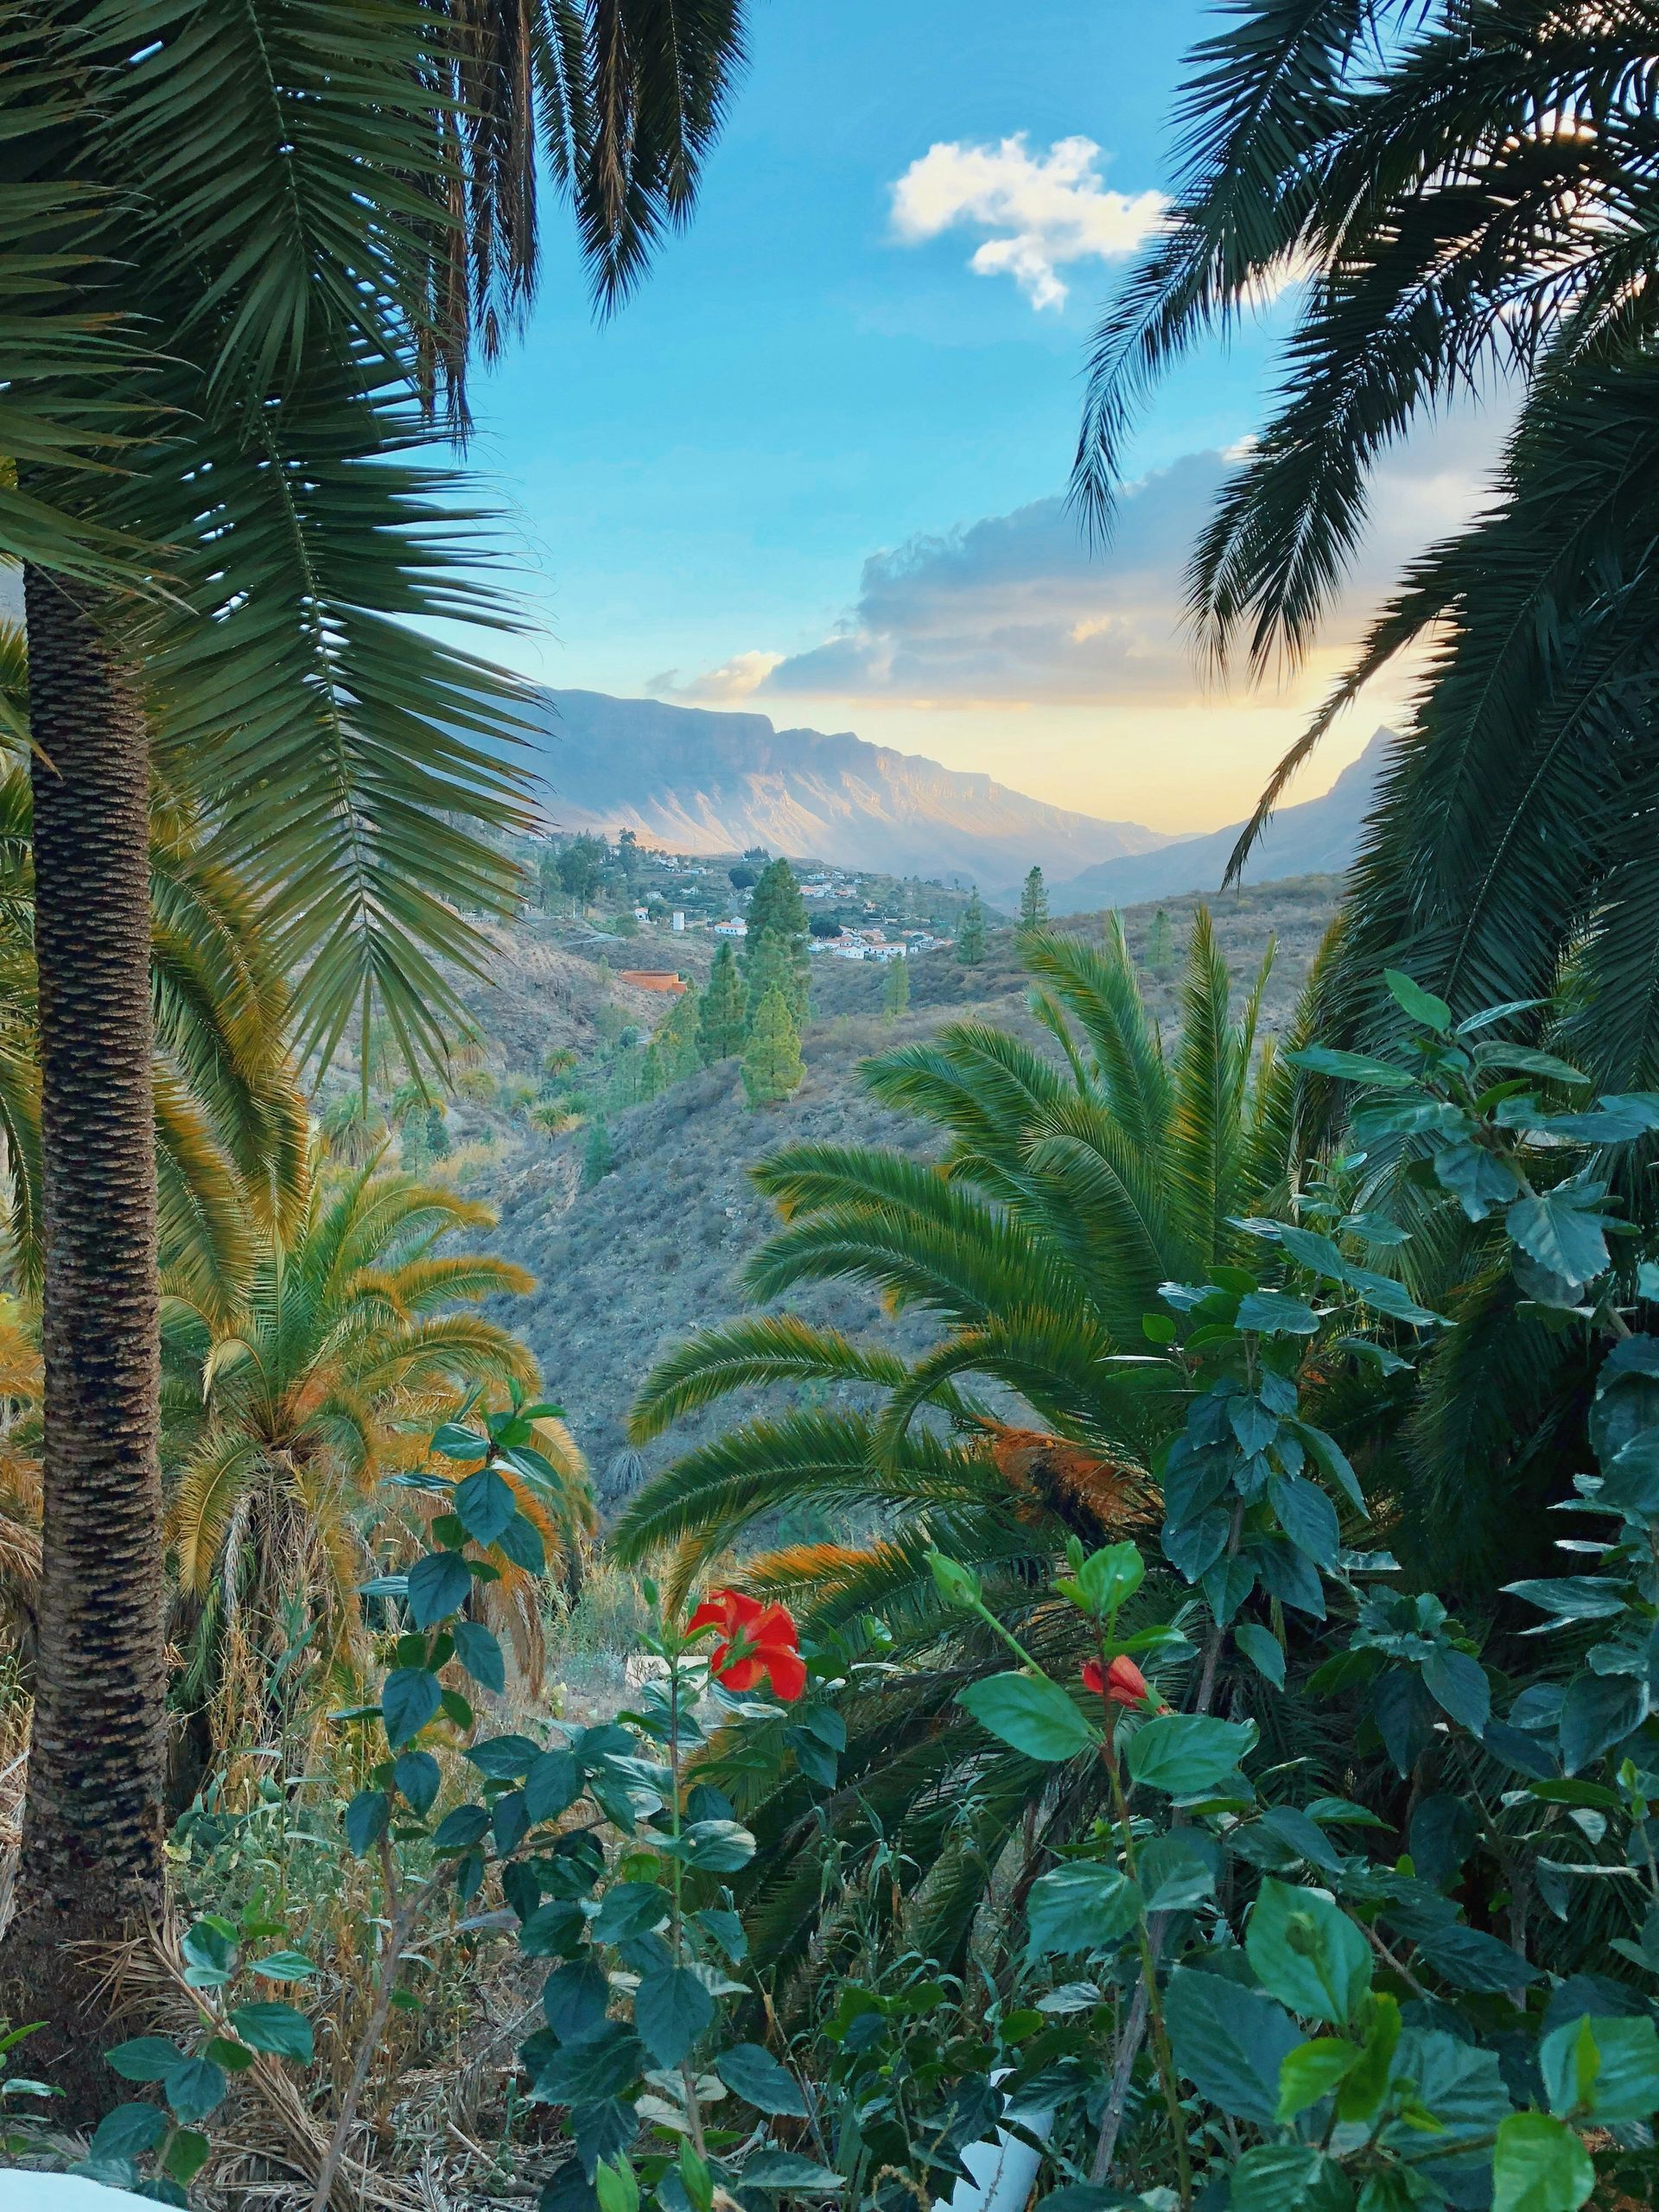 Amazing View of The Canary Islands, a Spanish Archipelago off the Coast of Northwestern Africa, Palm Trees with Mountains as Background, Spain - Gran Canaria Holidays Barter's Travelnet